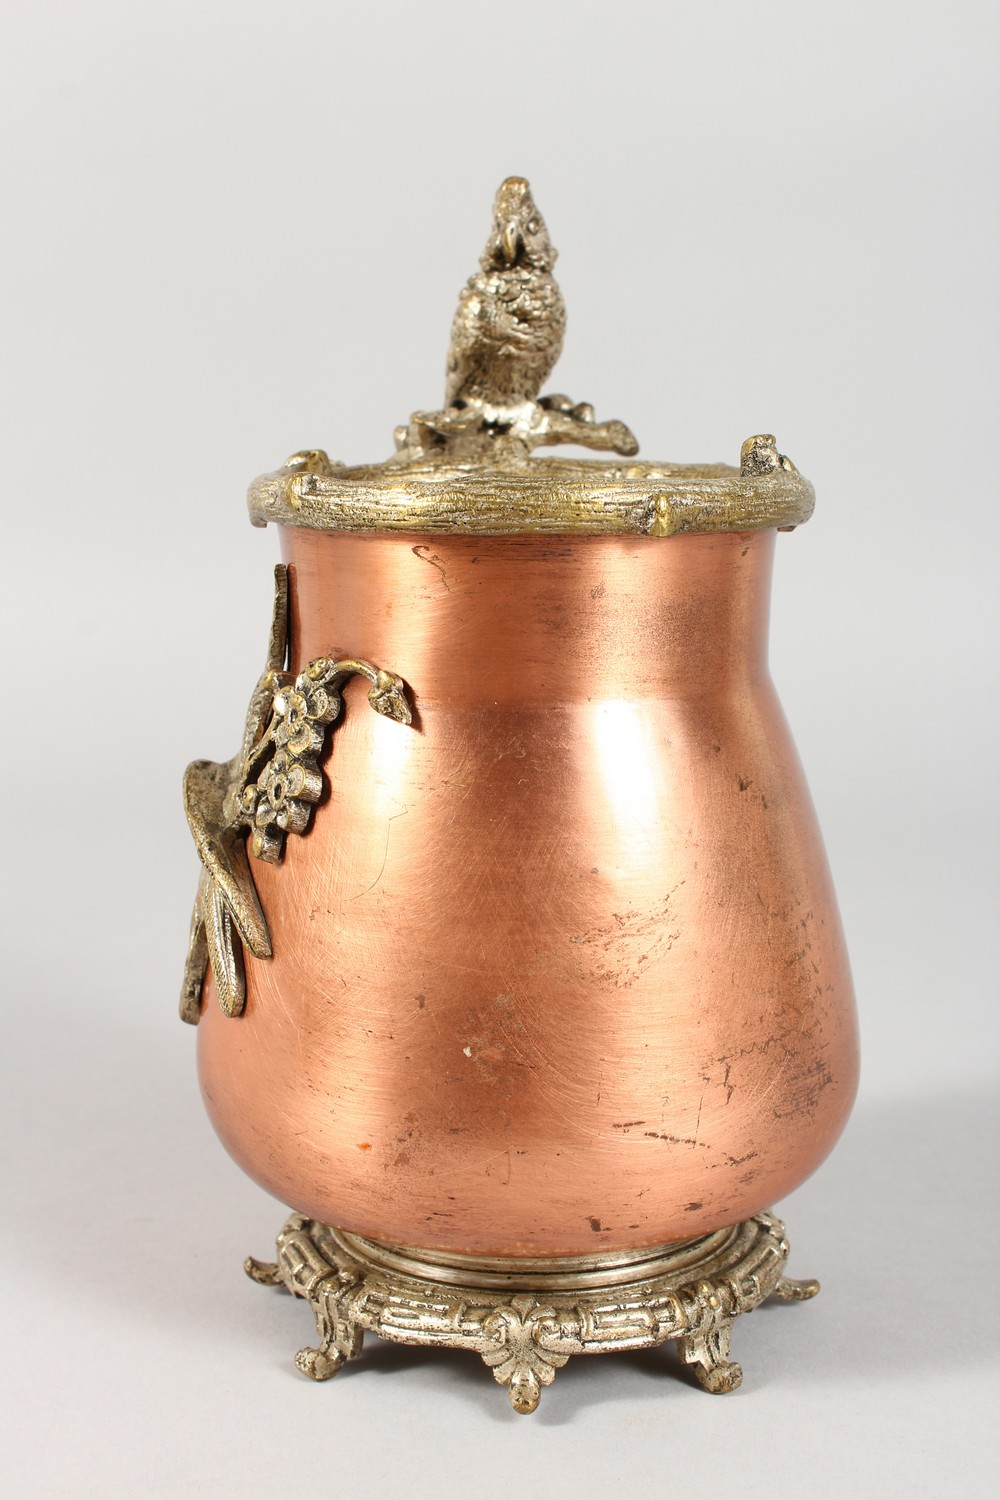 A COPPER VASE, with cast metal mounts, modelled as birds. 8ins high. - Image 4 of 8